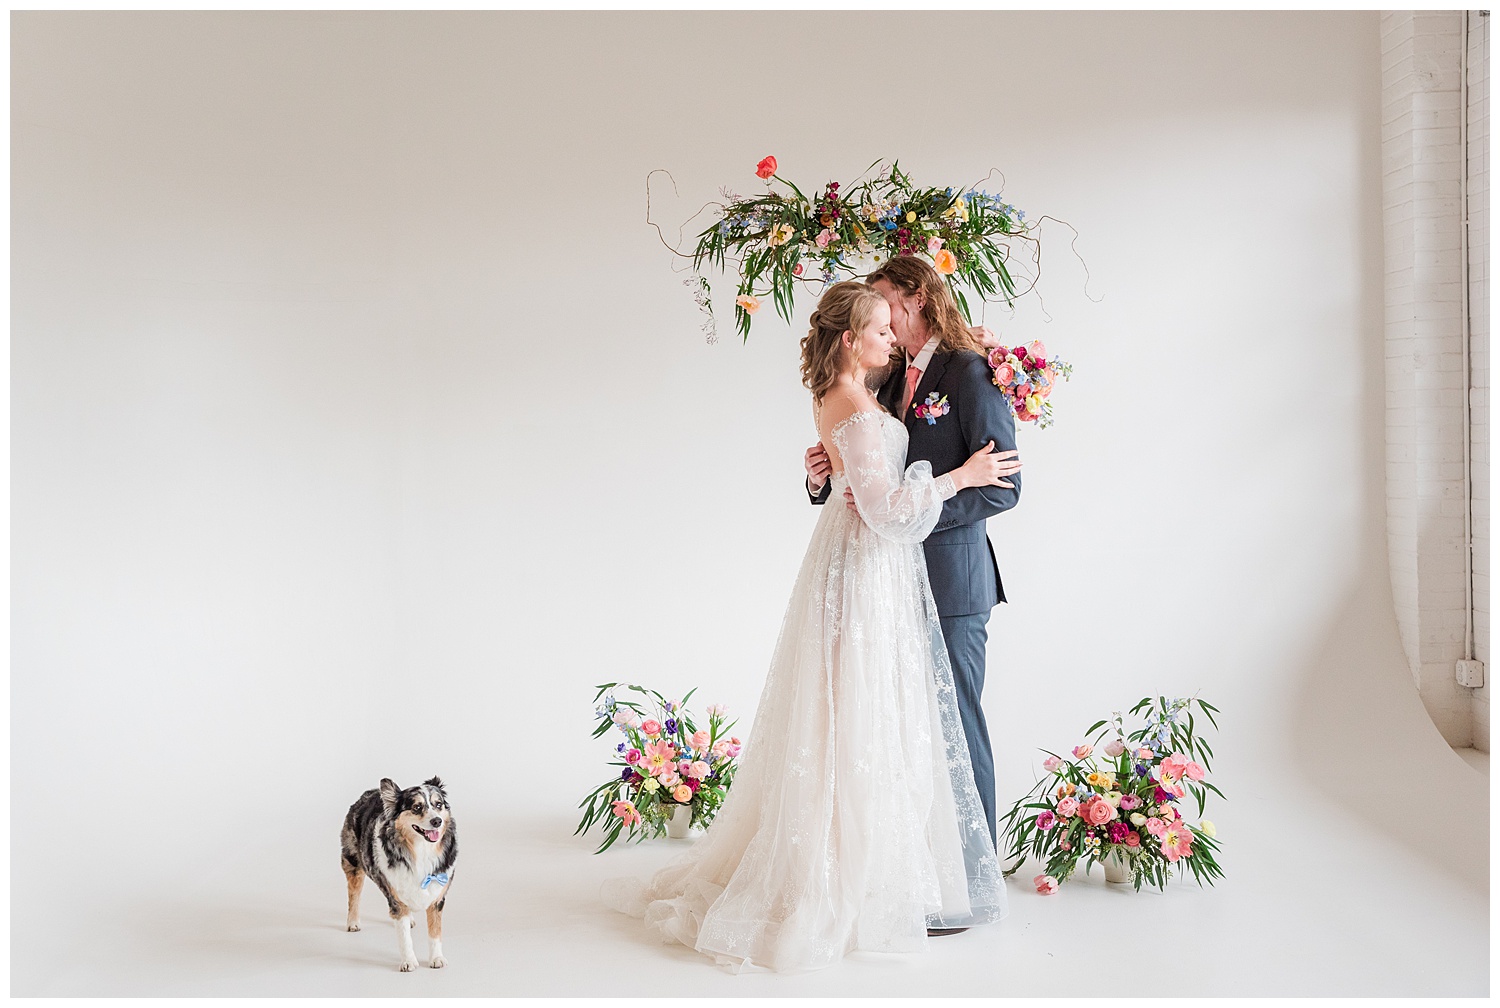 Bride and groom inside Realm Denver embrace in front of the Open Space area as their alter with their dog patiently standing watch nearby.